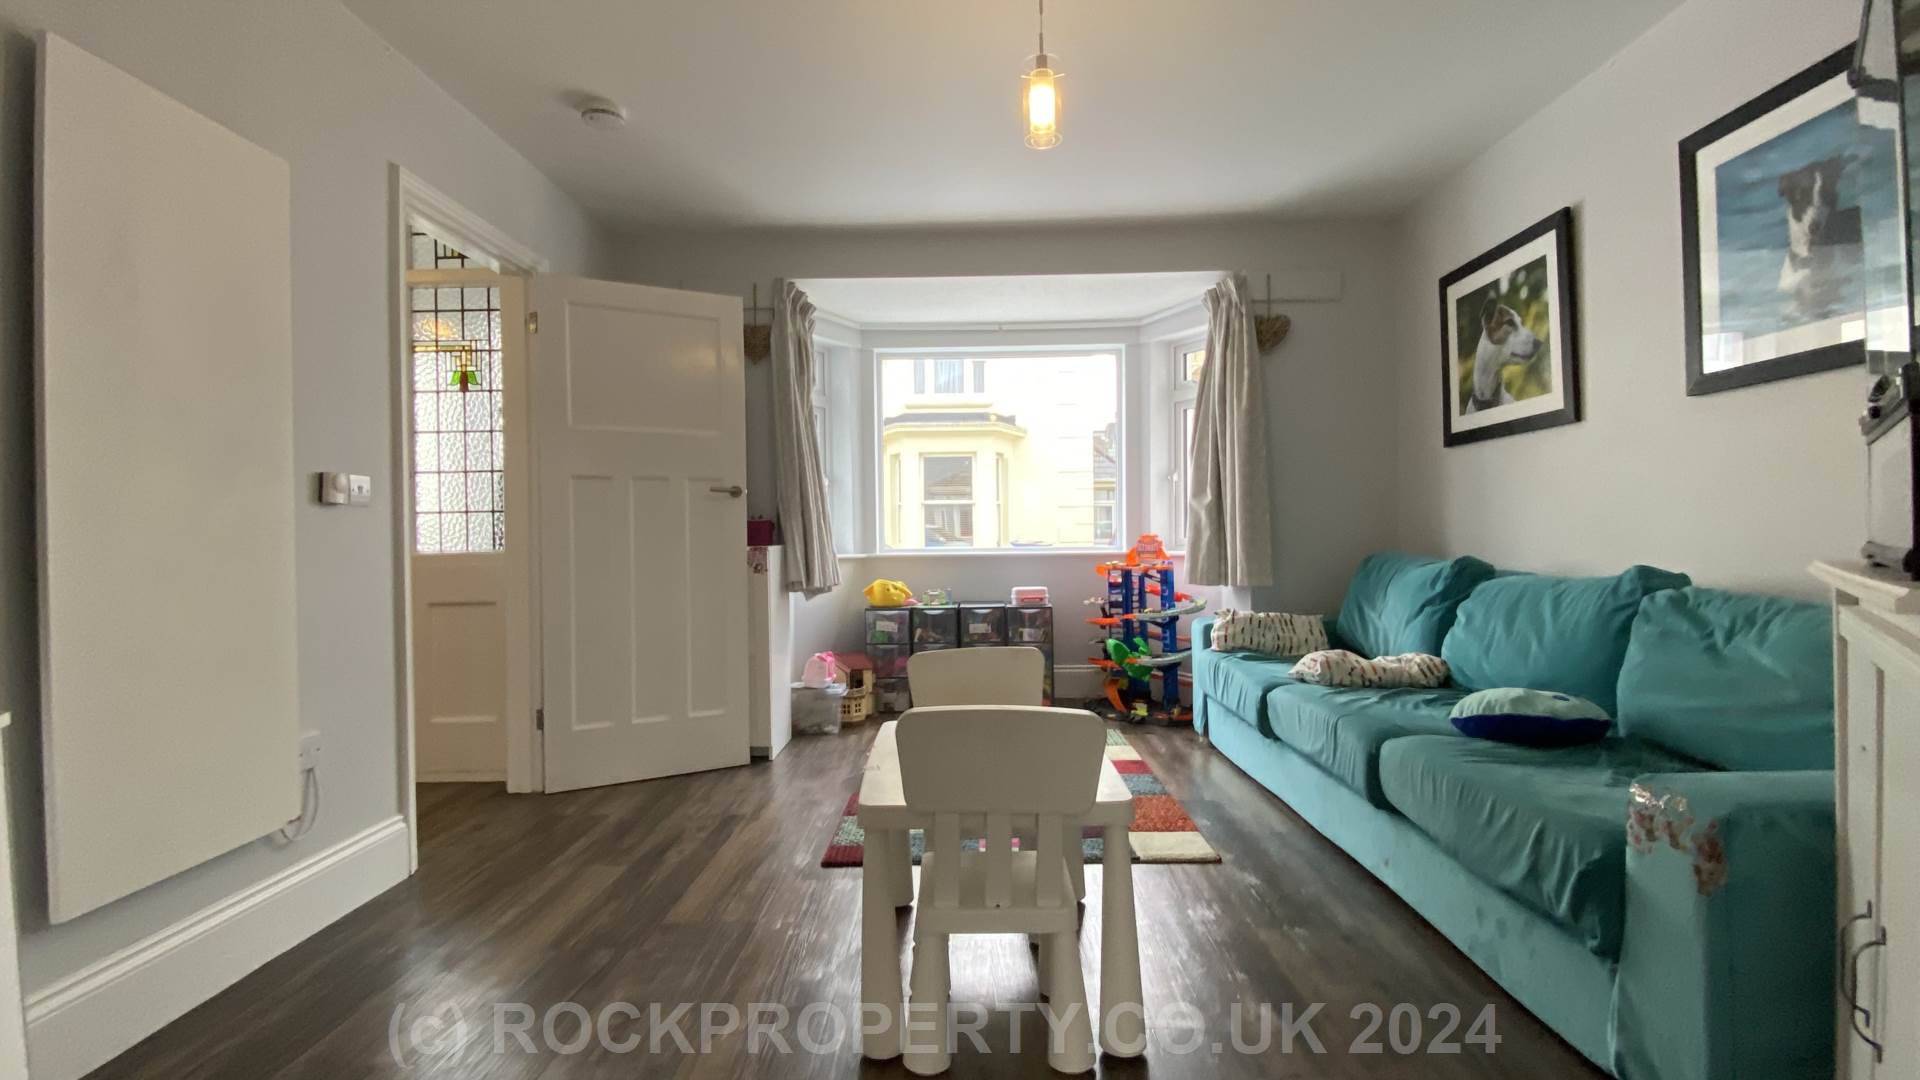 SPACIOUS 3 BED FAMILY HOME, Bellozanne Road, First Tower, Image 4